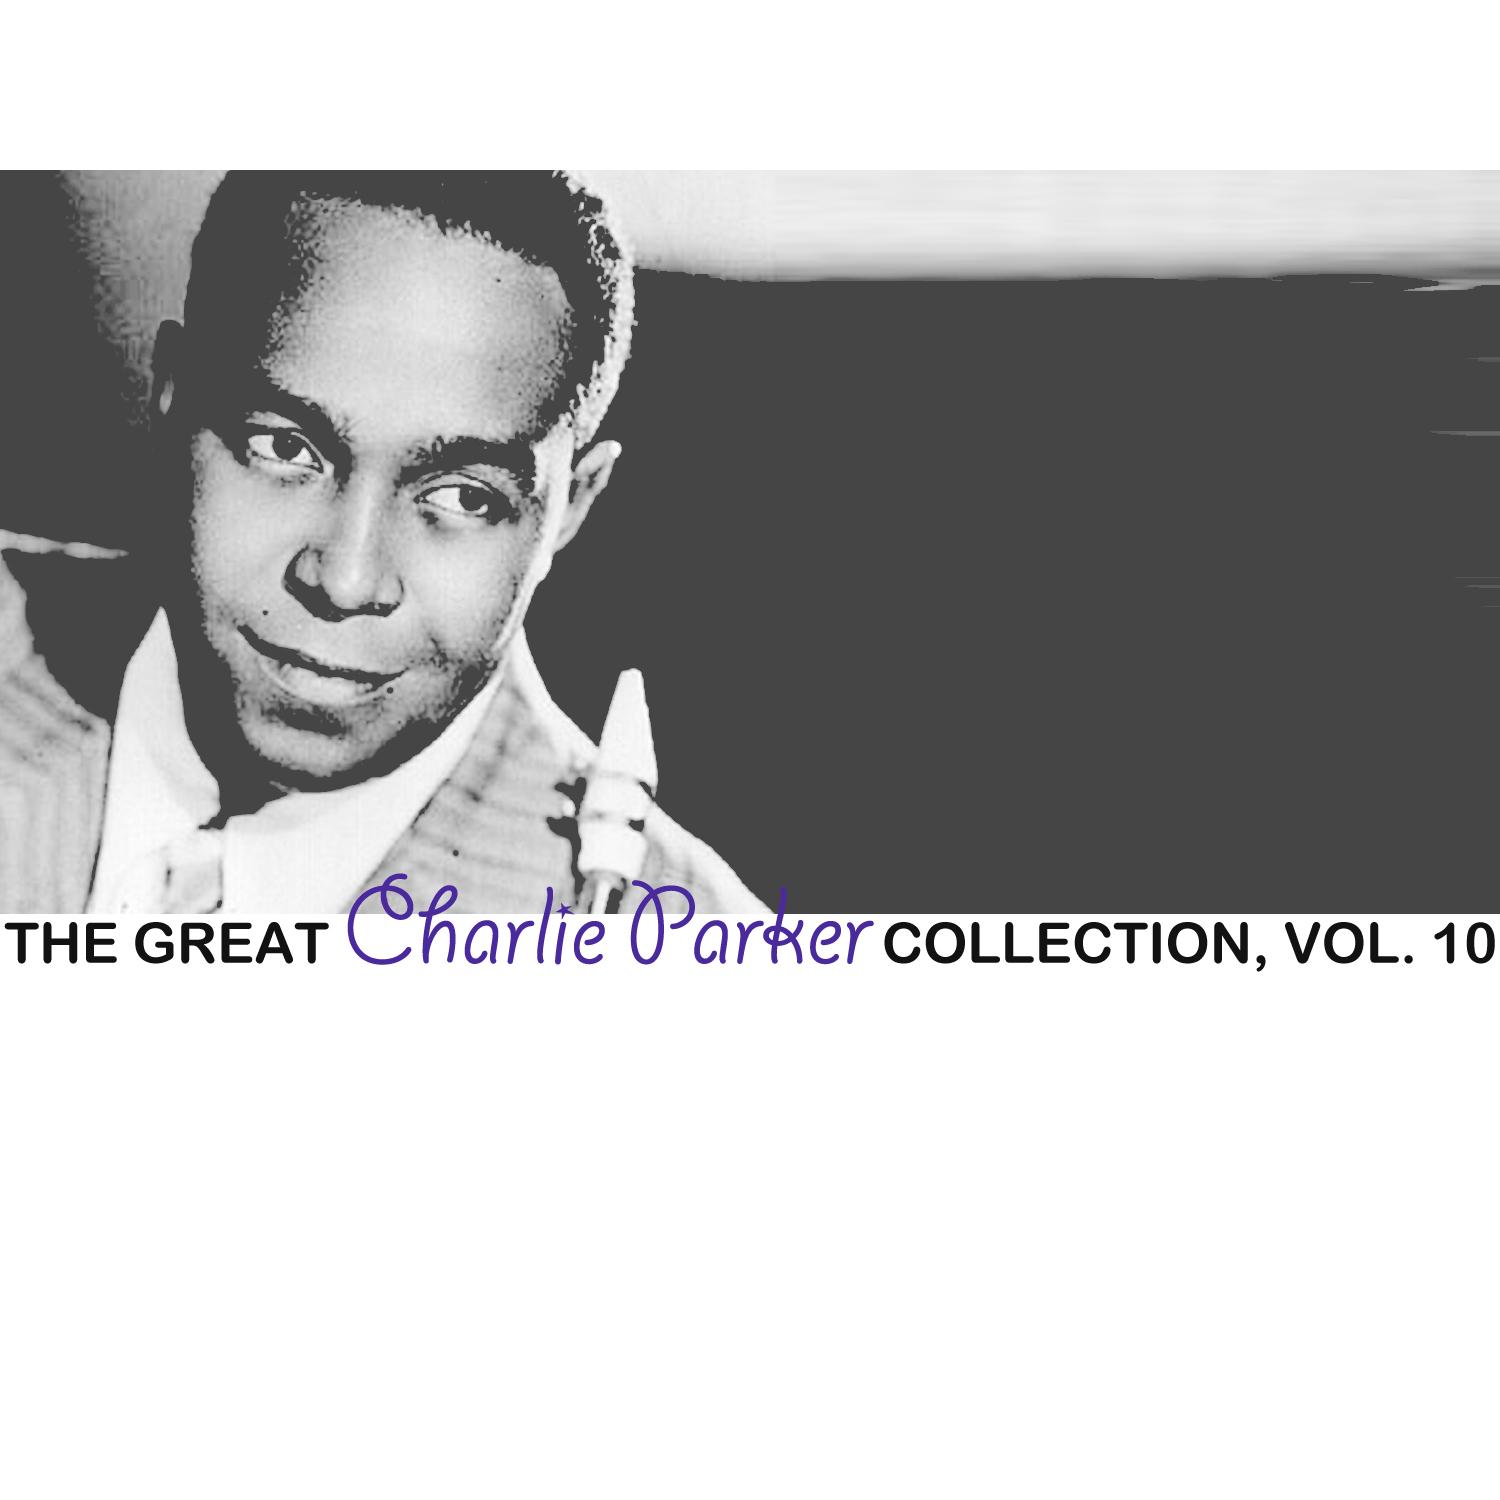 The Great Charlie Parker Collection, Vol. 10